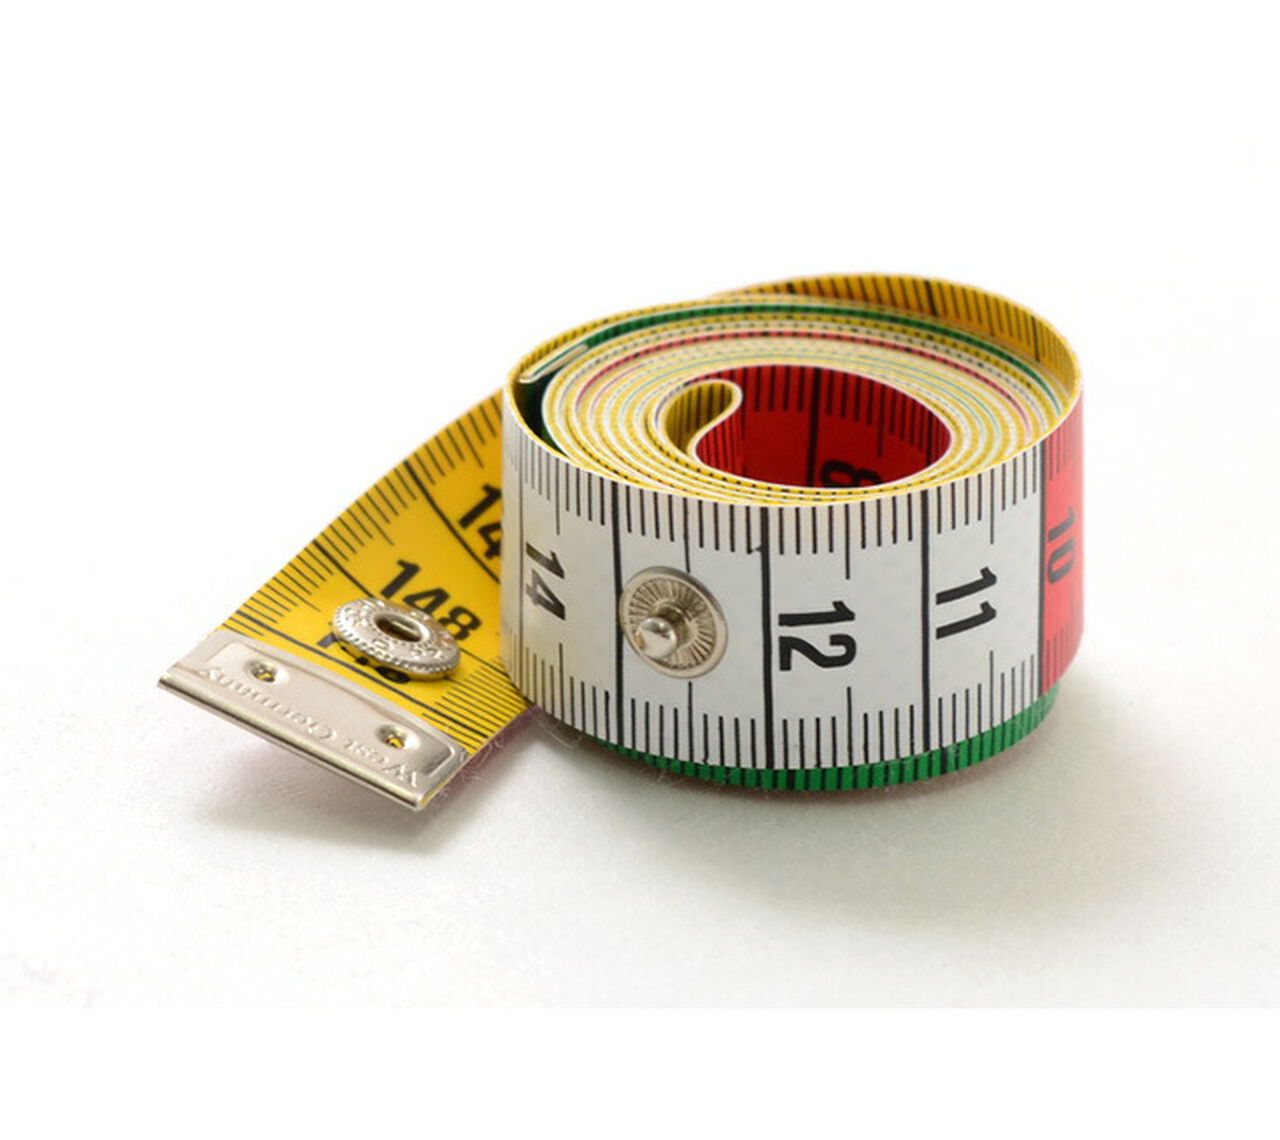 Soft Measuring Tape Ruler With Closed Button 1.8cm X 150cm 60 